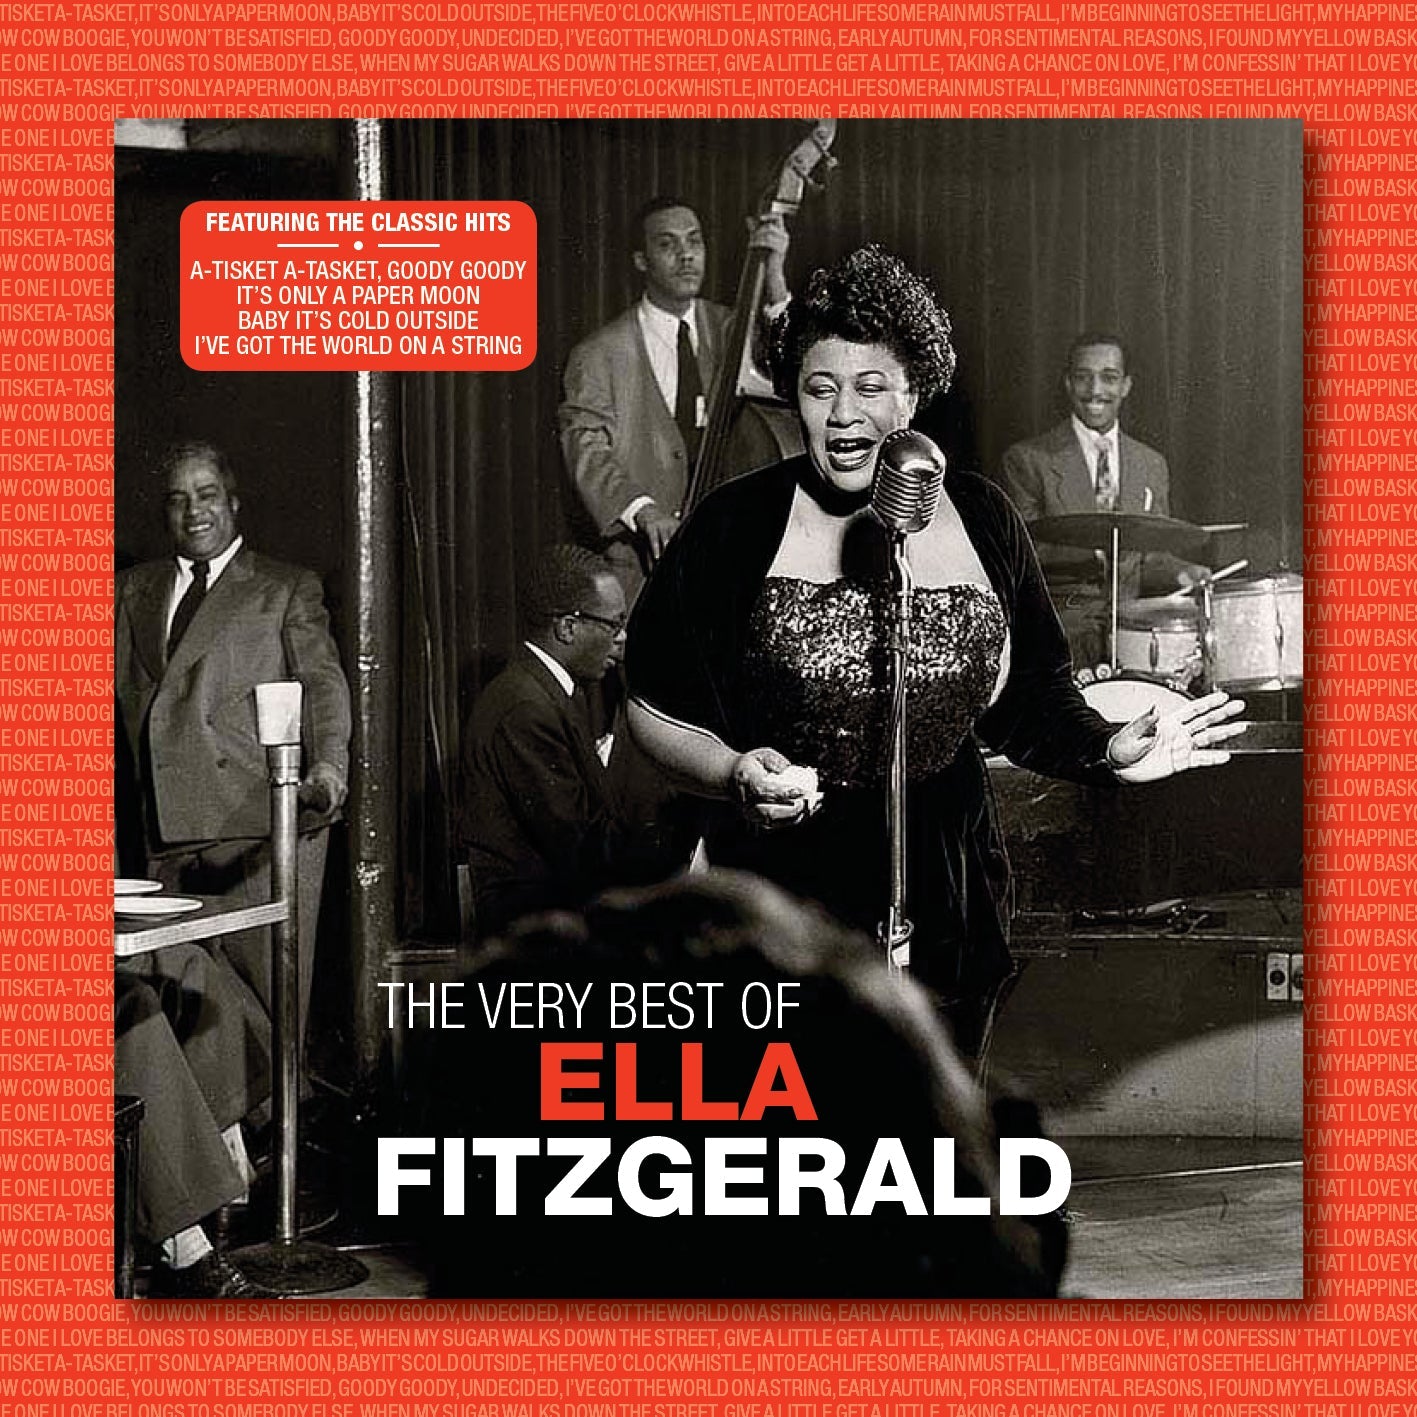 ELLA FITZGERALD - THE VERY BEST OF